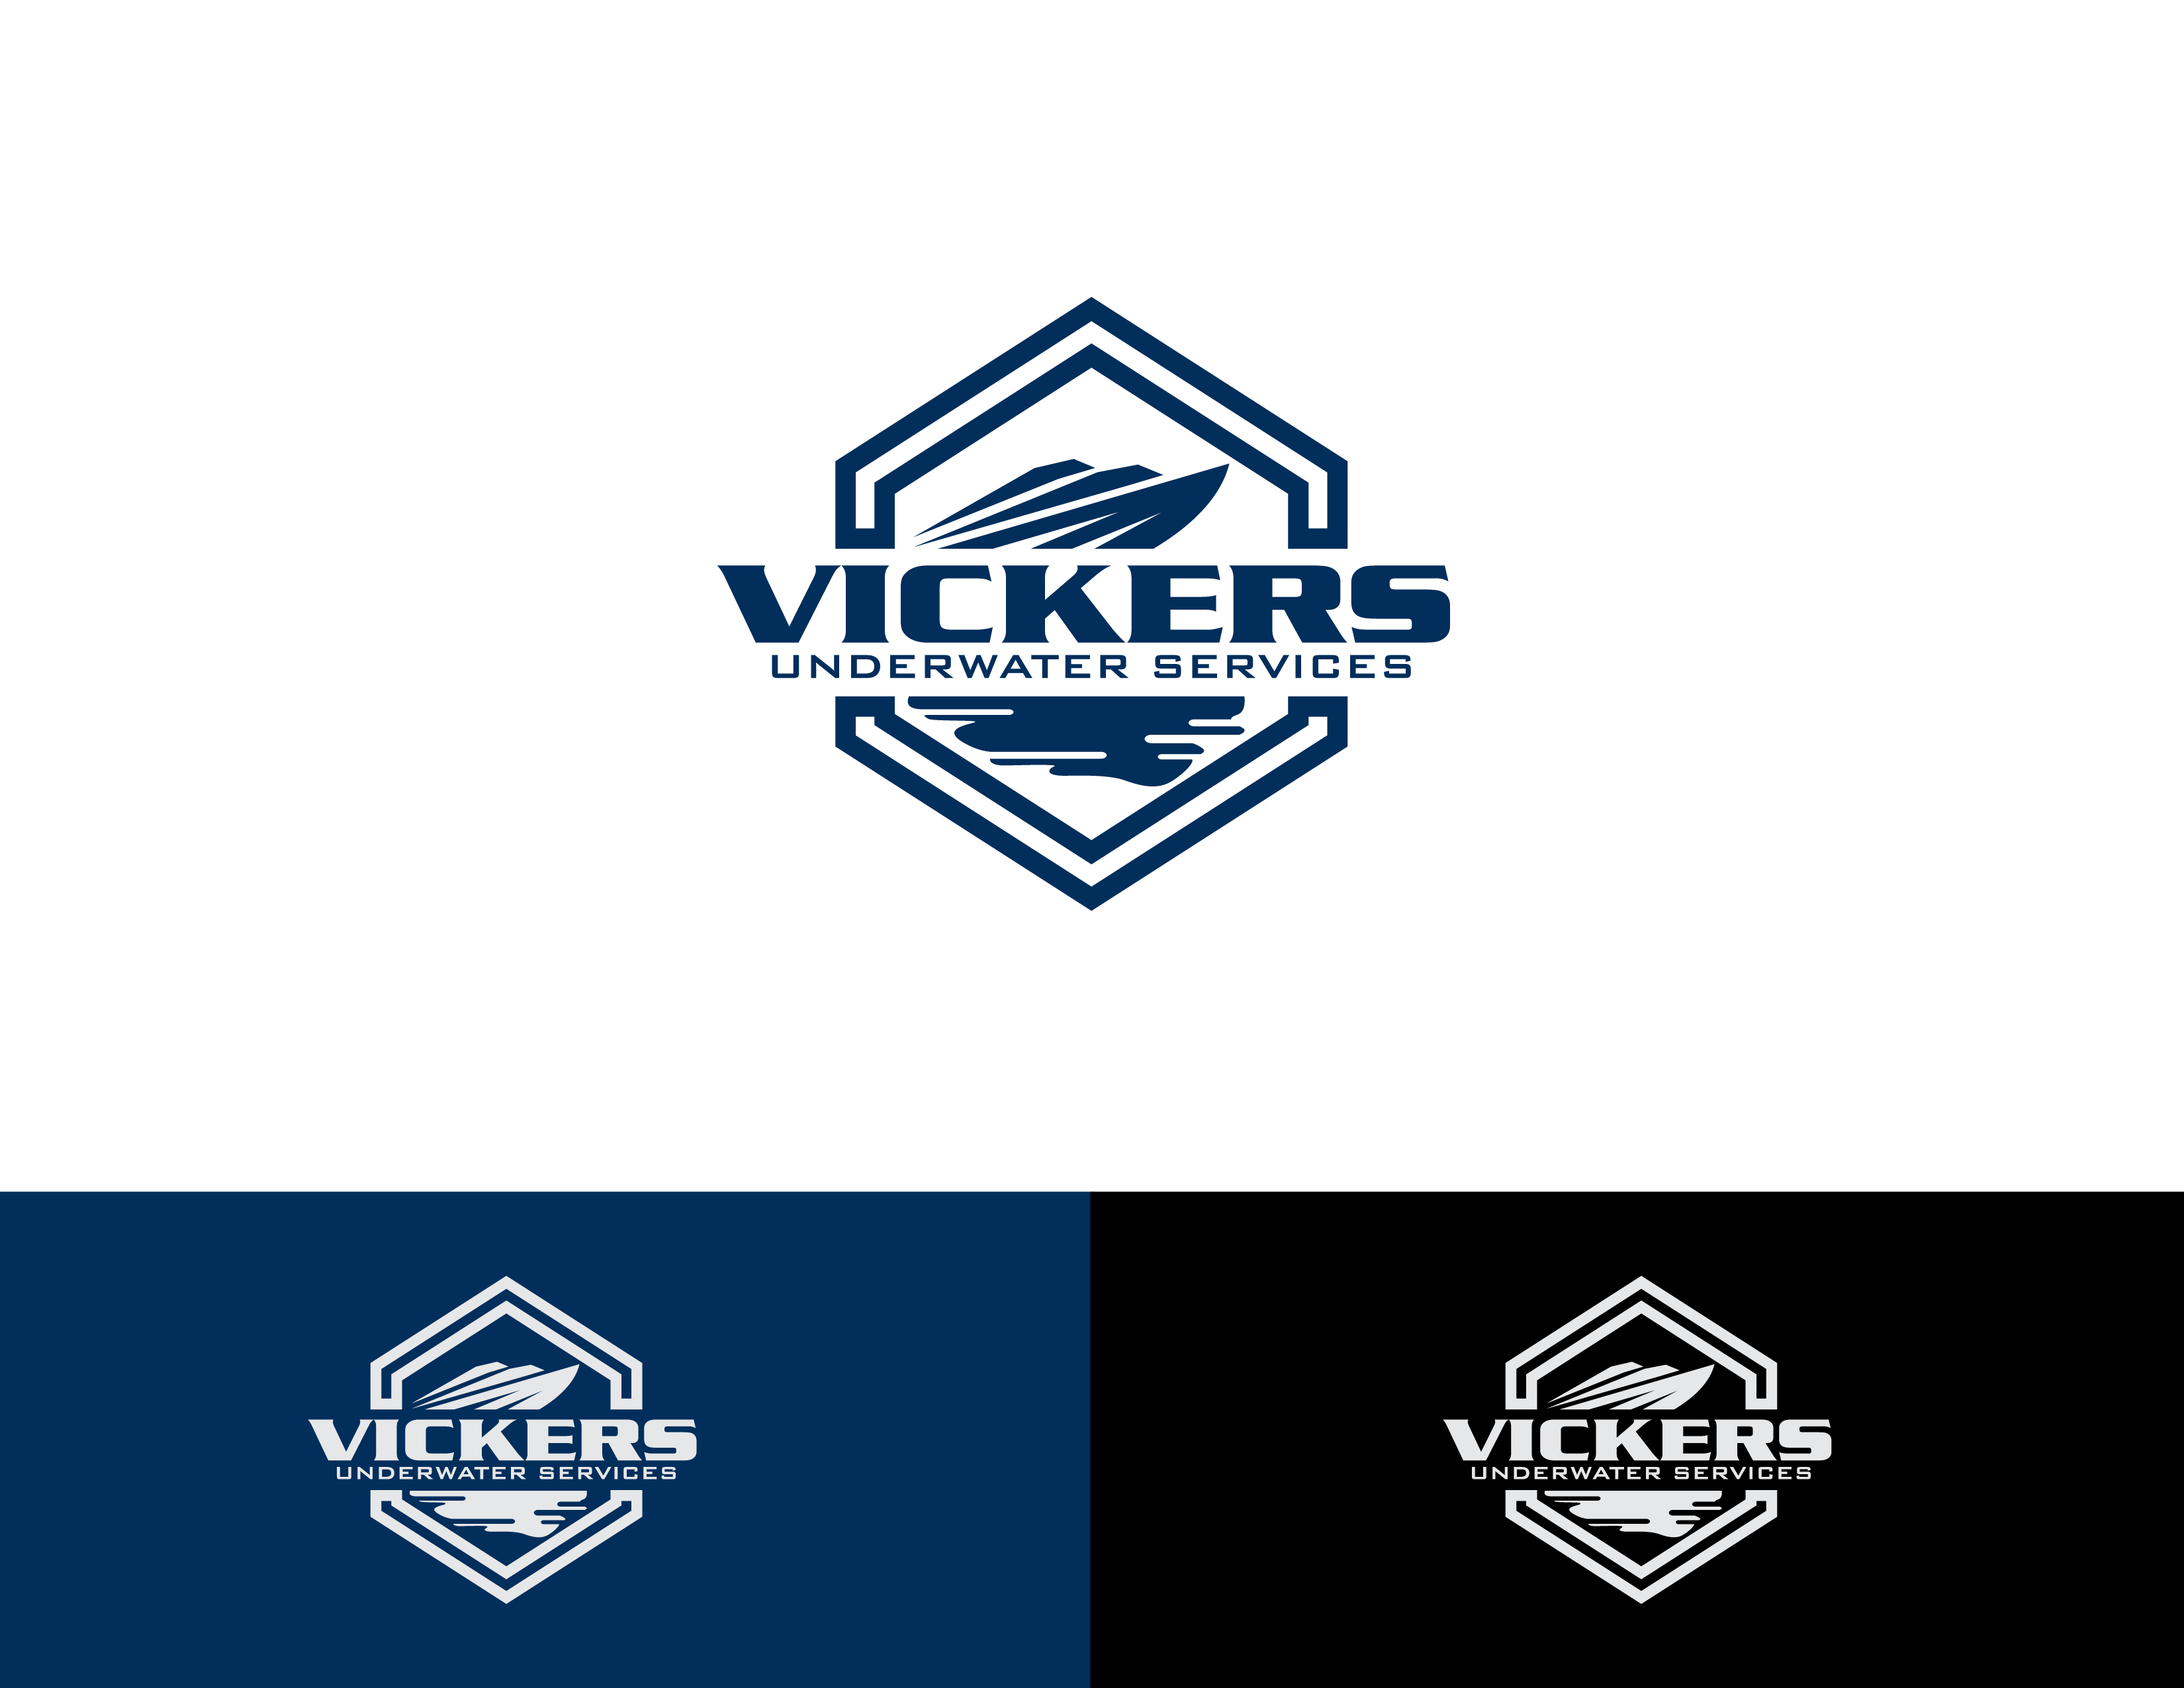 Vickers Logo - Logo and Business Card Design. 'VICKERS UNDERWATER SERVICES